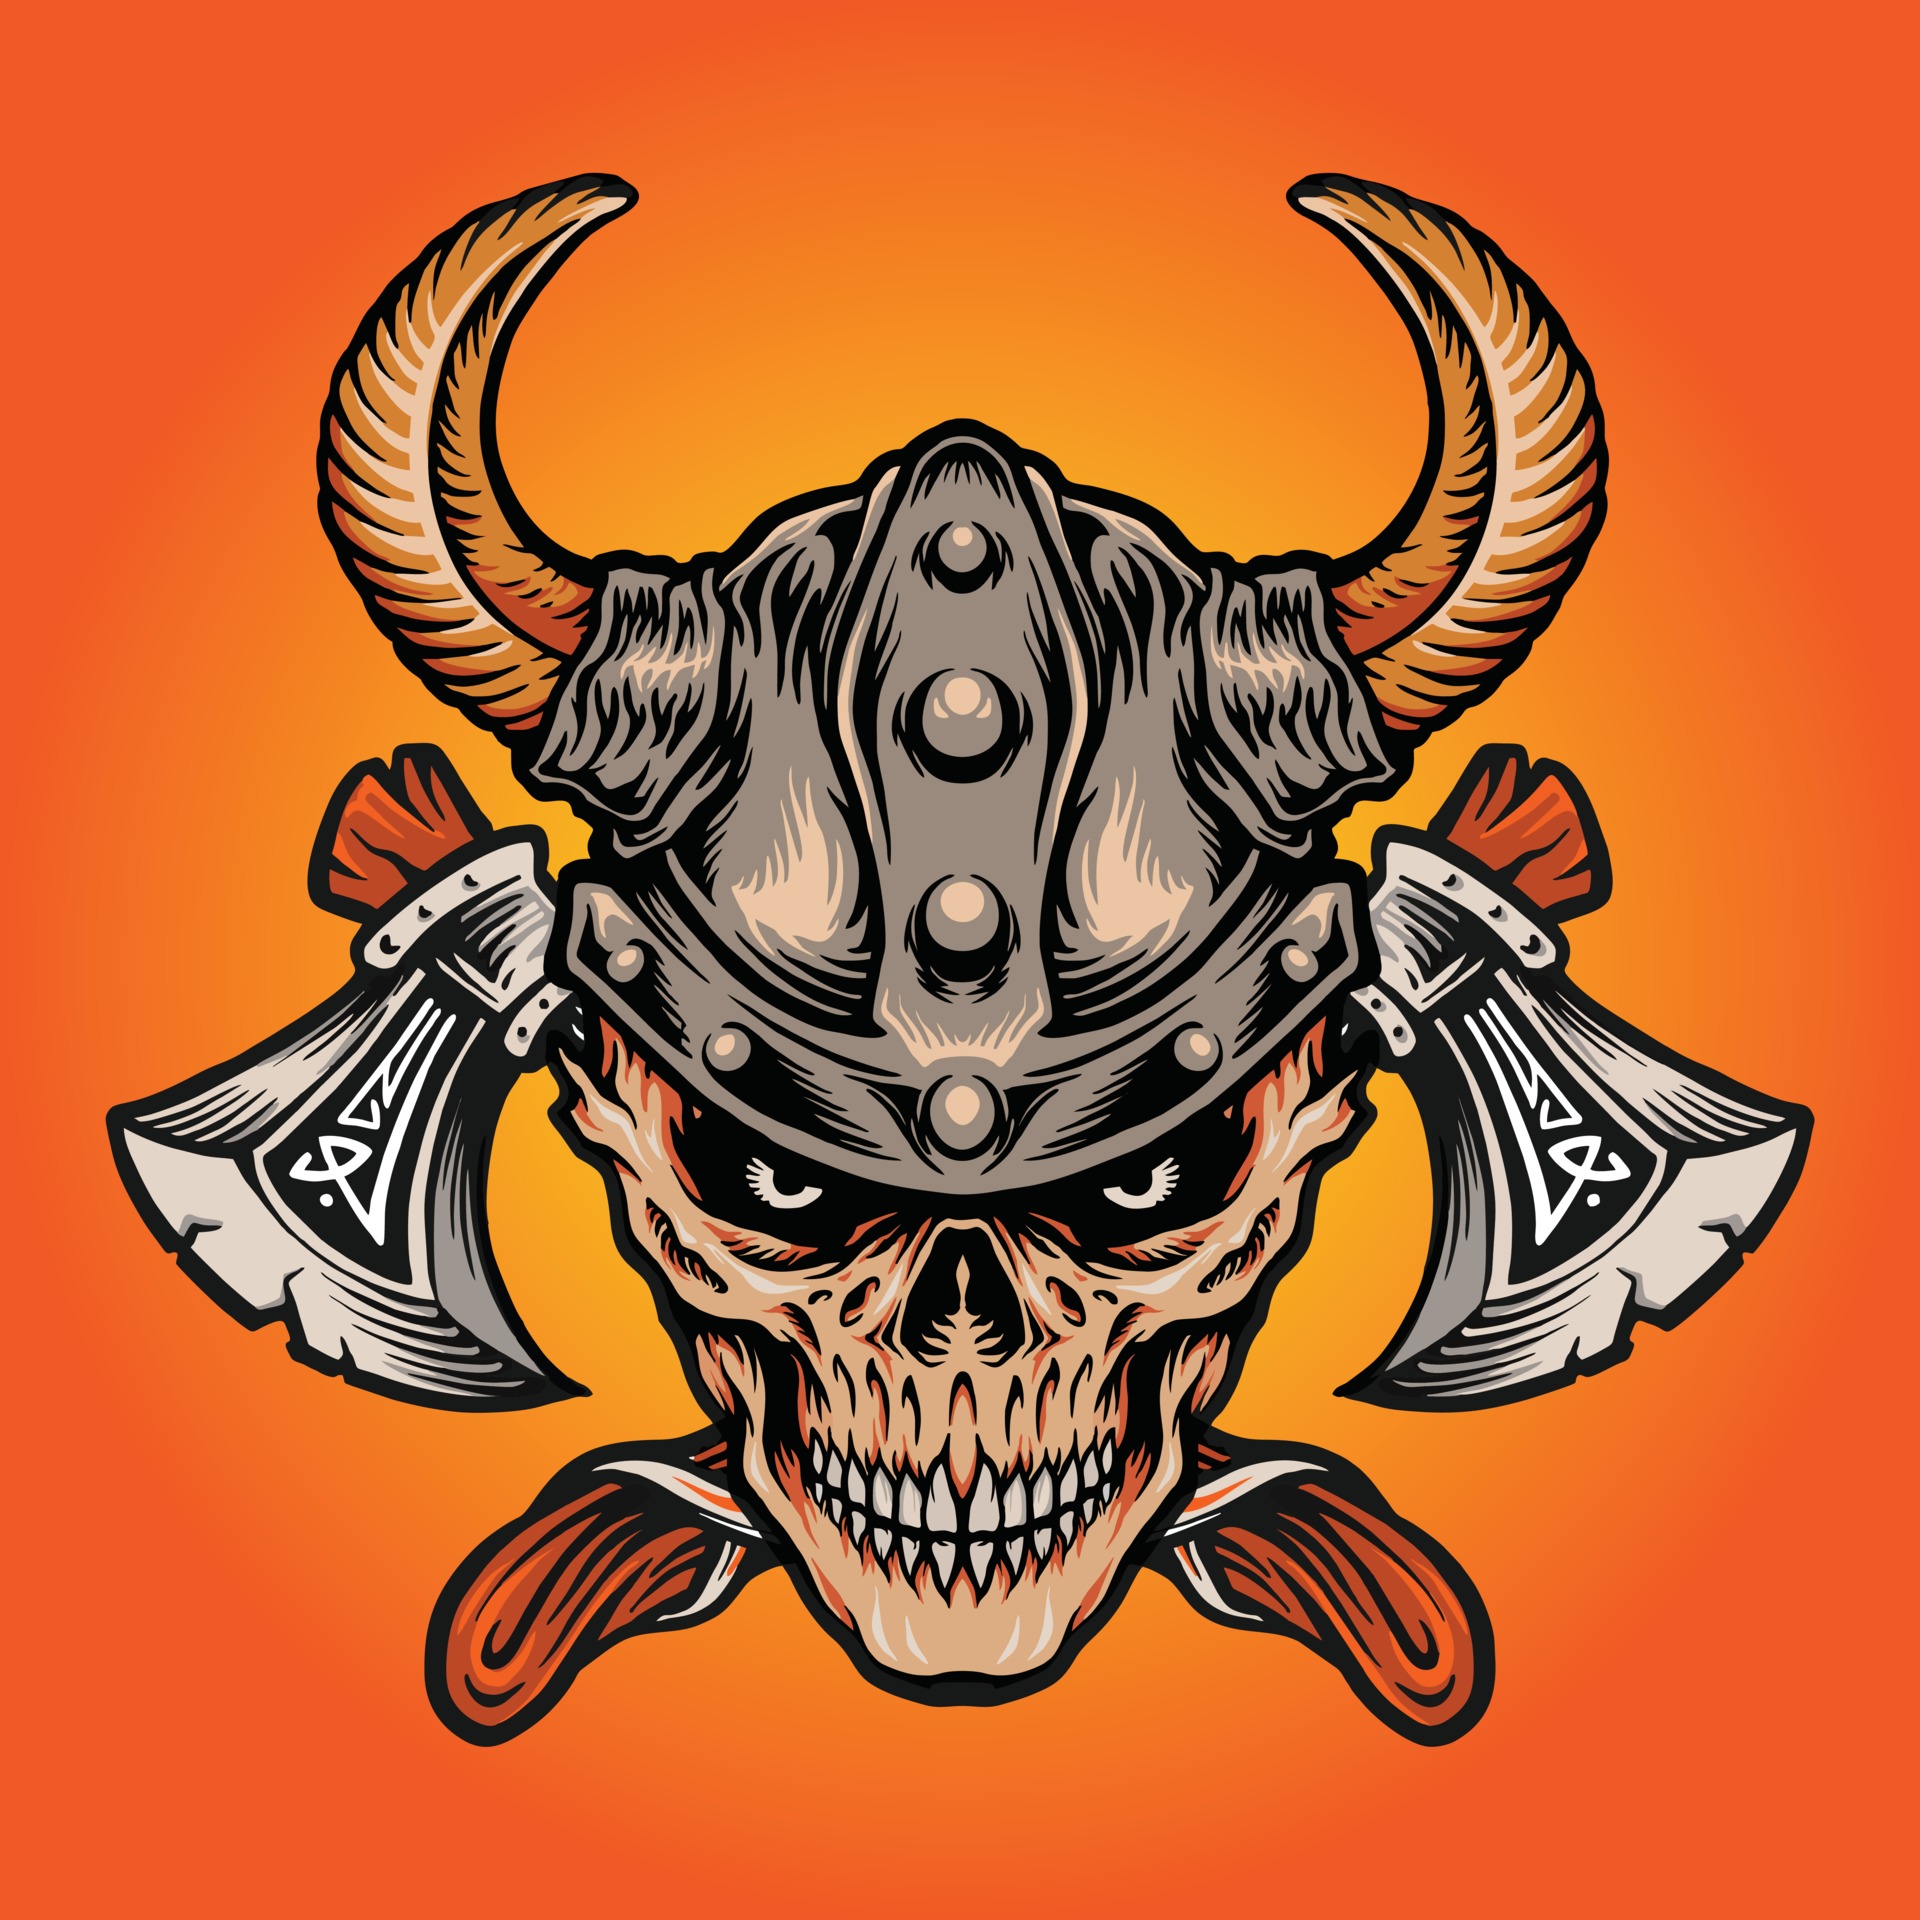 Skull Warrior Images – Browse 31,039 Stock Photos, Vectors, and